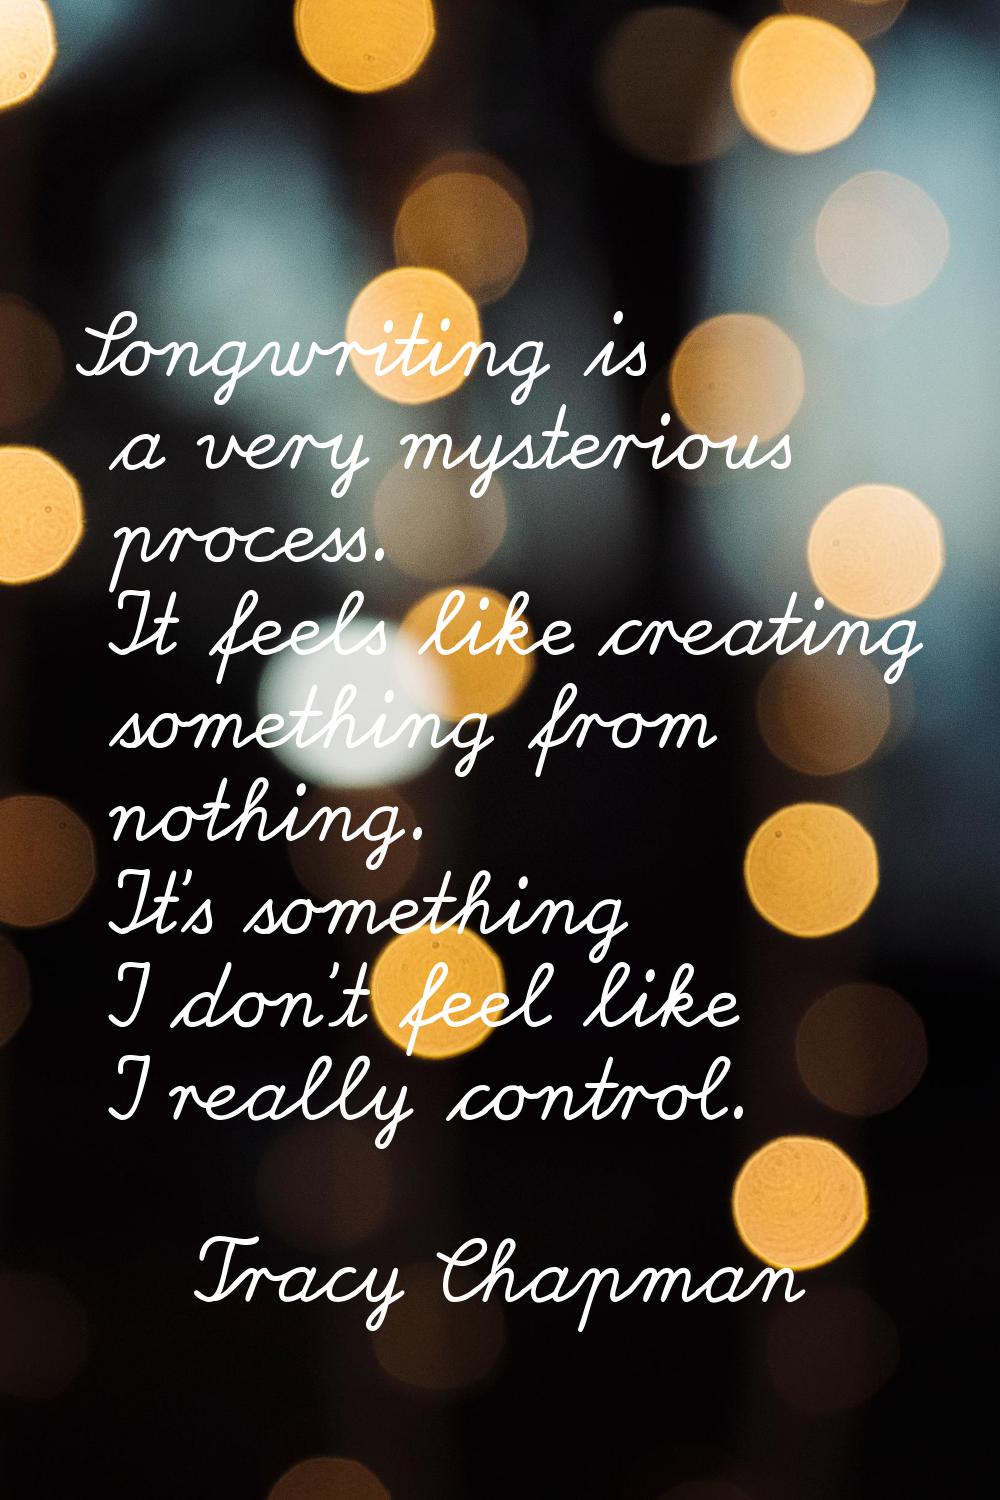 Songwriting is a very mysterious process. It feels like creating something from nothing. It's somet